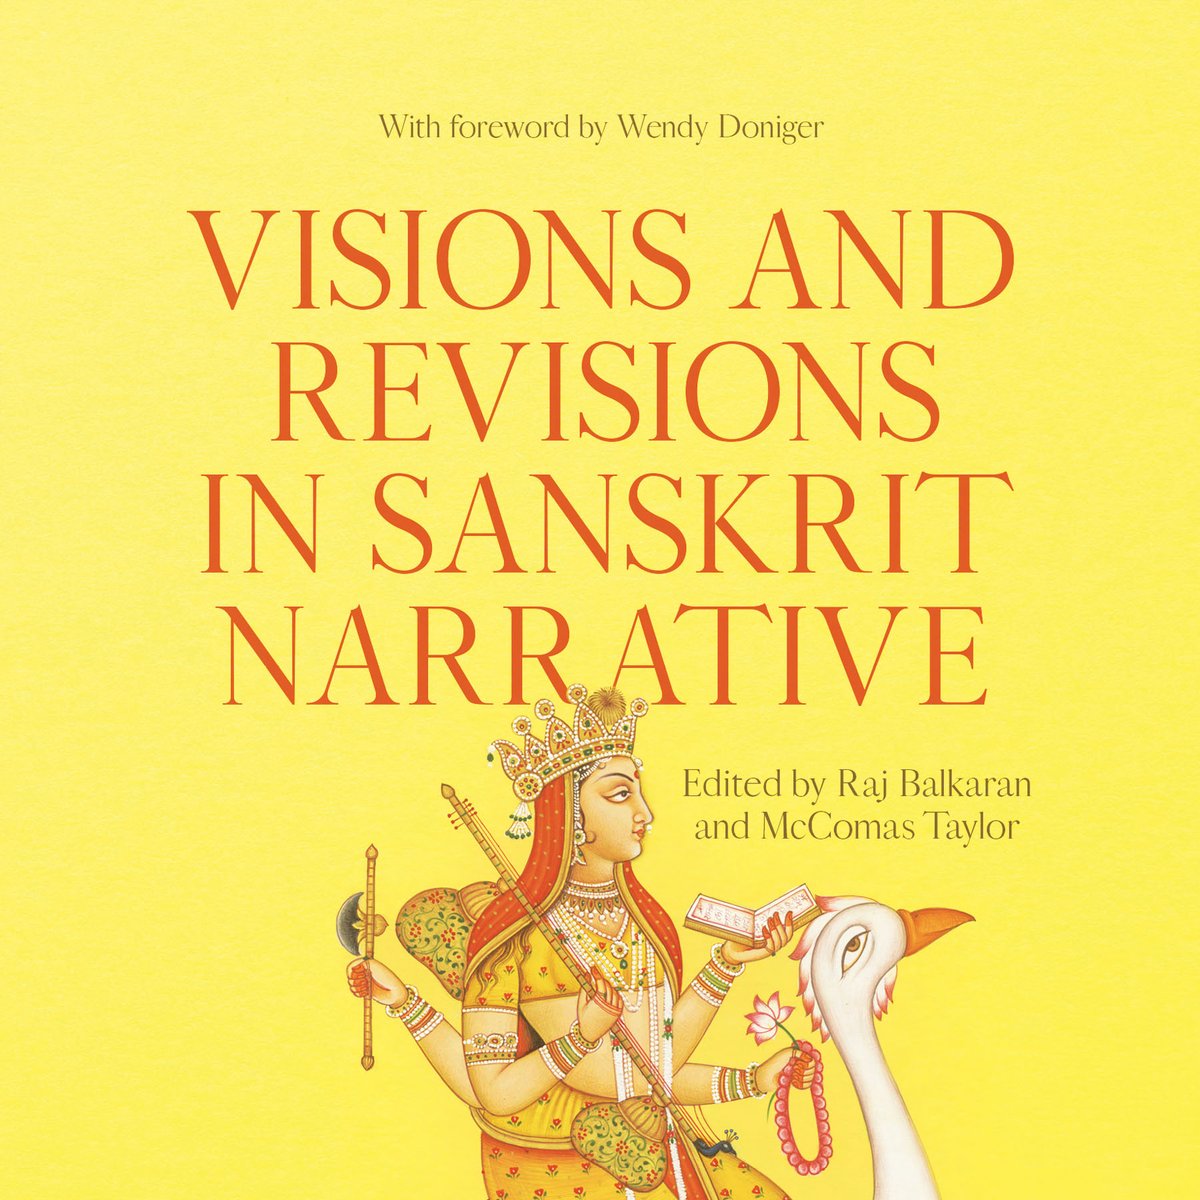 The pre-launch of ‘Visions and Revisions in Sanskrit Narrative’ was hosted by editors @ANU_CHL McComas Taylor and @DrRajBalkaran earlier this week. This book unites the foremost scholars of #Sanskrit narrative texts across the globe! Publishing soon doi.org/10.22459/VRSN.…